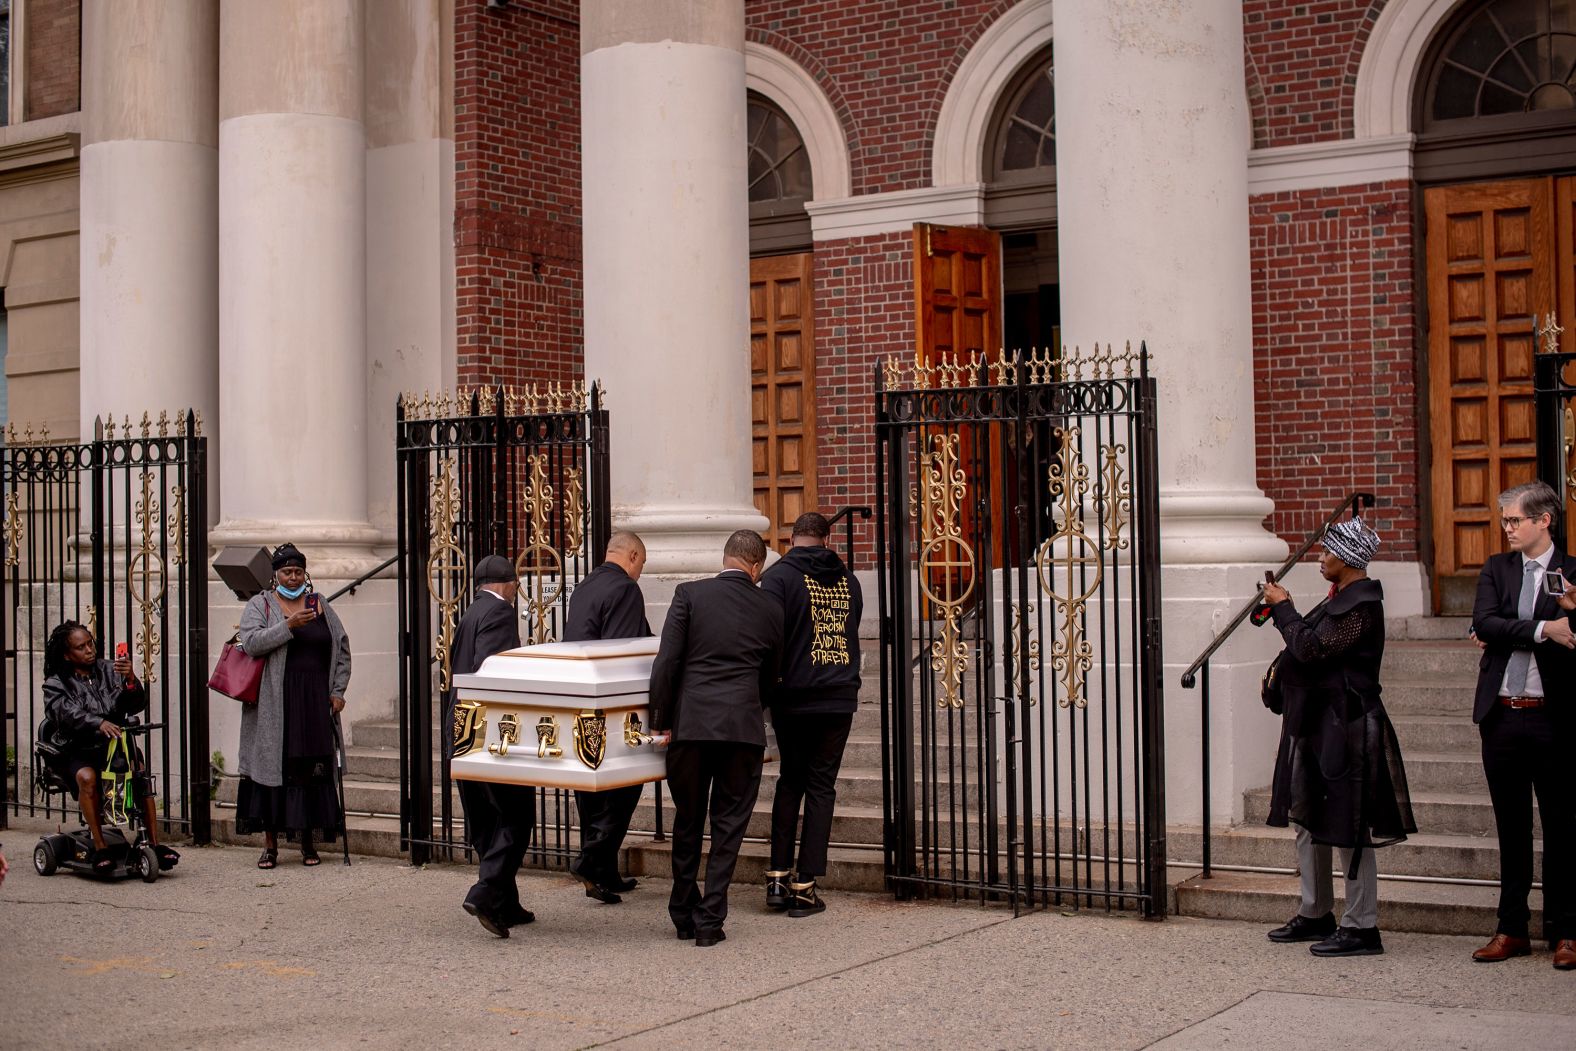 The casket containing Jordan Neely's body is carried into the Mount Neboh Baptist Church in Harlem, New York, ahead of <a href="index.php?page=&url=https%3A%2F%2Fwww.cnn.com%2F2023%2F05%2F19%2Fus%2Fjordan-neely-funeral-harlem%2Findex.html" target="_blank">his funeral</a> on Friday, May 19. Neely, the 30-year-old homeless street artist who was the victim of a fatal chokehold on a New York City subway, was remembered at his funeral as a "well known and loved" performer.